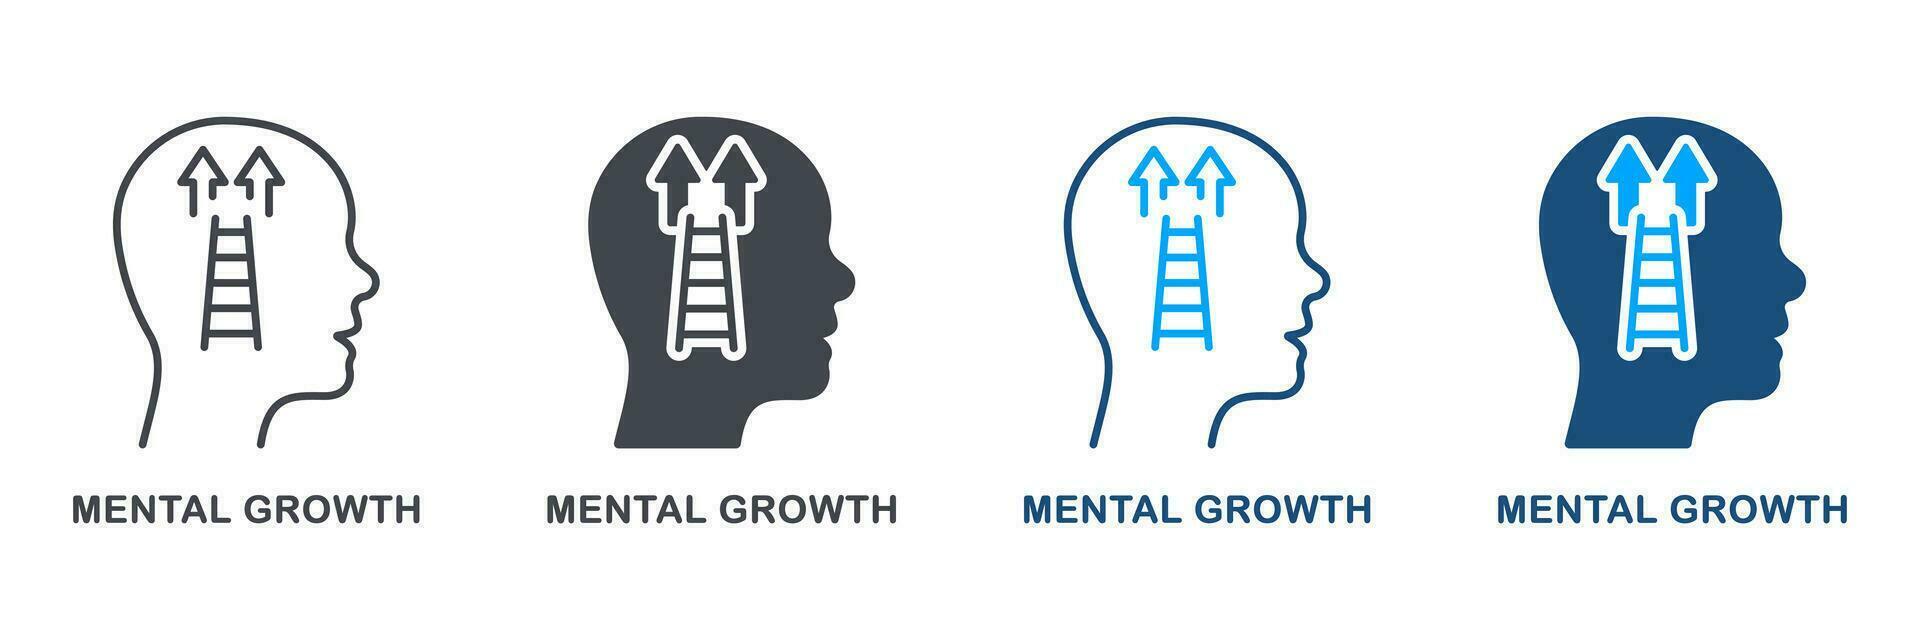 Mental Growth, Potential Career Silhouette and Line Icon Set. Psychology Therapy Symbol Collection. Human Head with Ladder, Motivation and Success Pictogram. Isolated Vector Illustration.